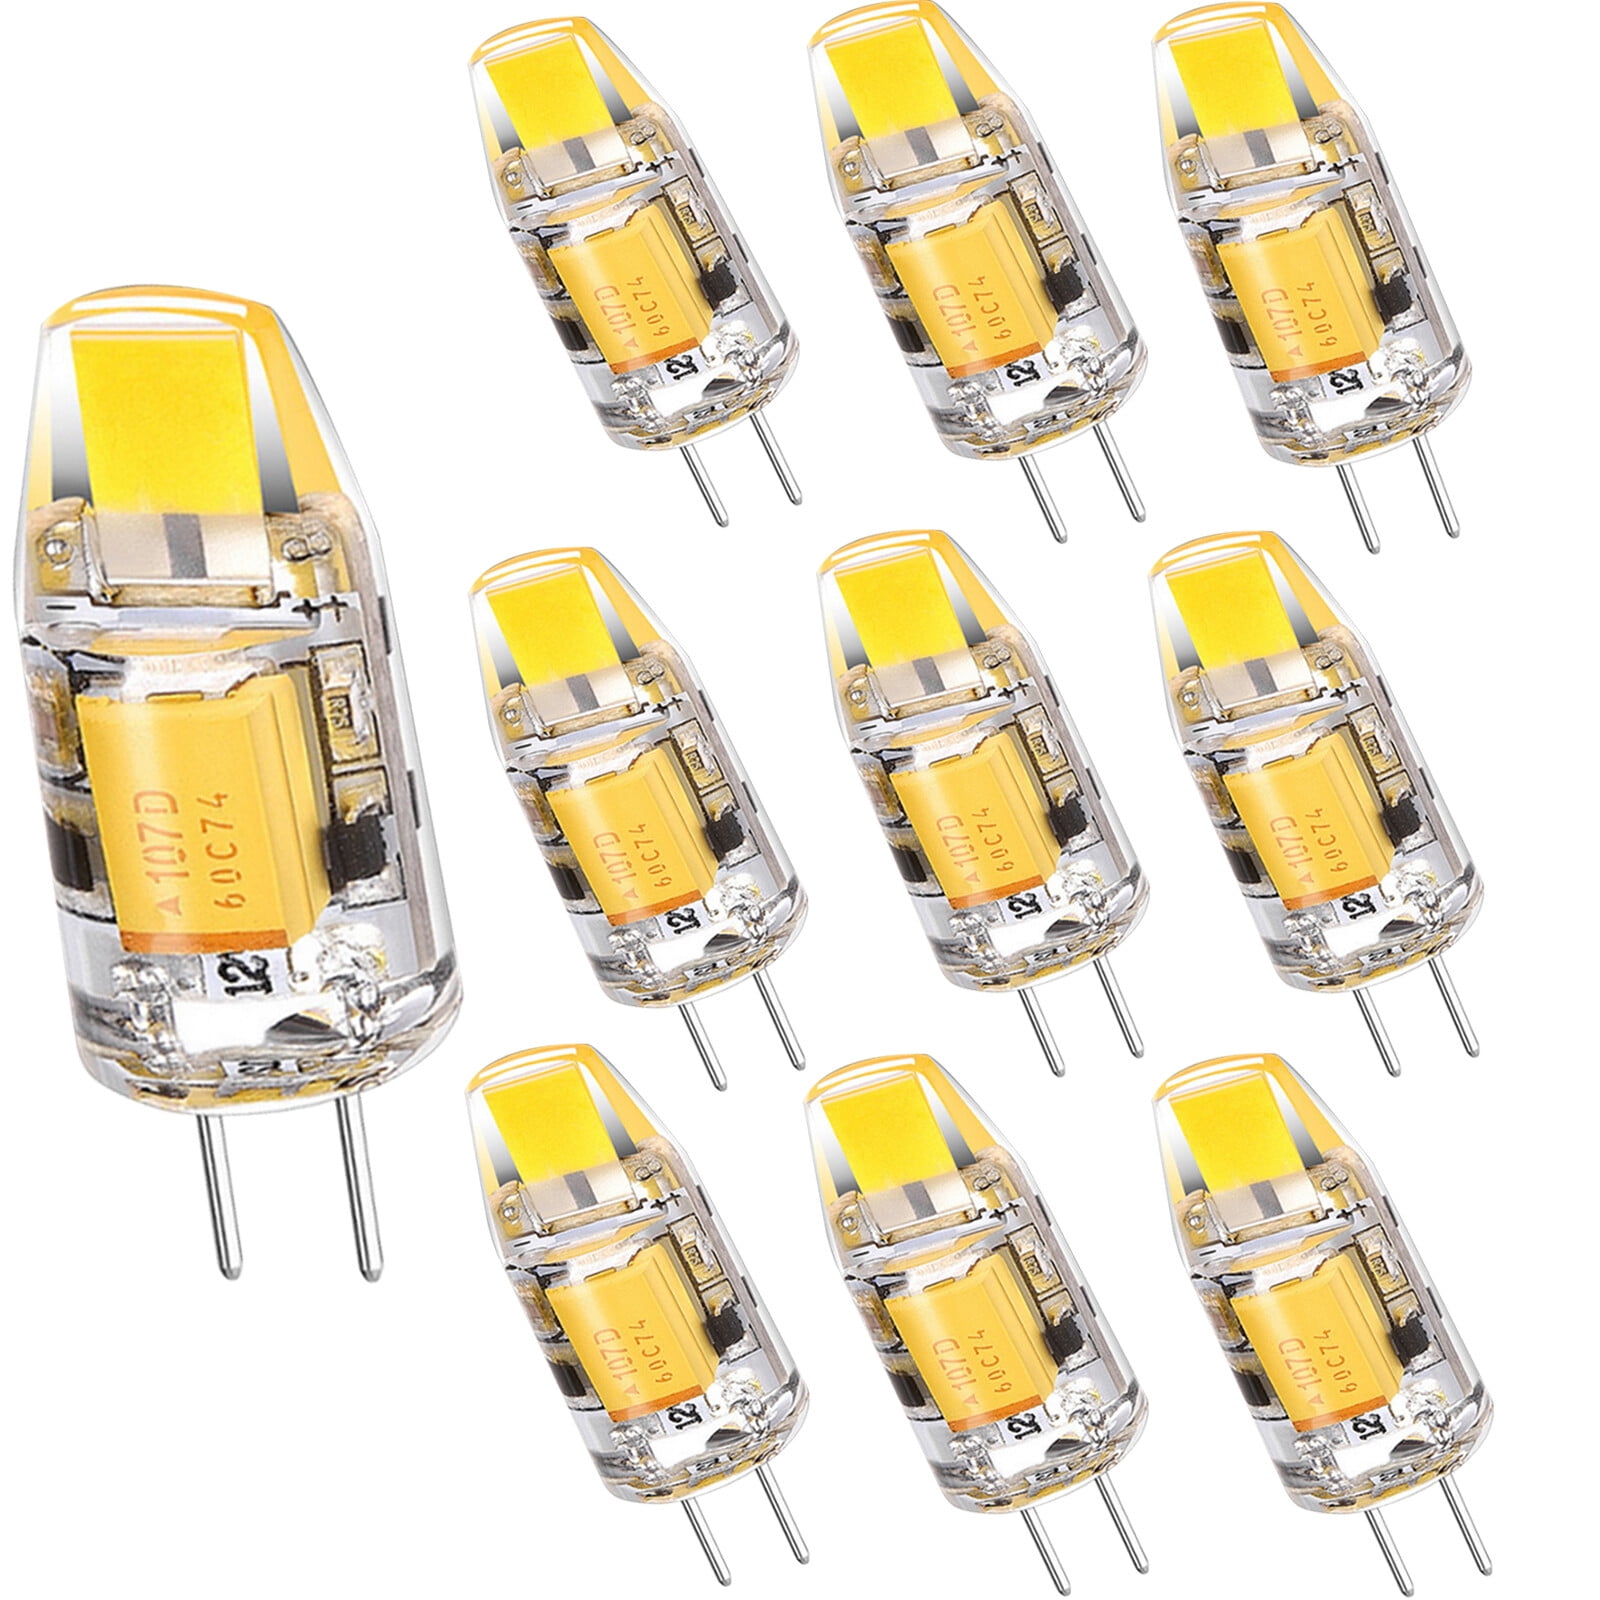 GRV 10Pcs G4 LED 2W 0705 COB SMD LED Bulb,Dimmable DC12-24V Cool White  Crystal Bulb LED Replacement of 20W Halogen Lamp,Super Bright led lamp for  RV and Landscape Lighting 